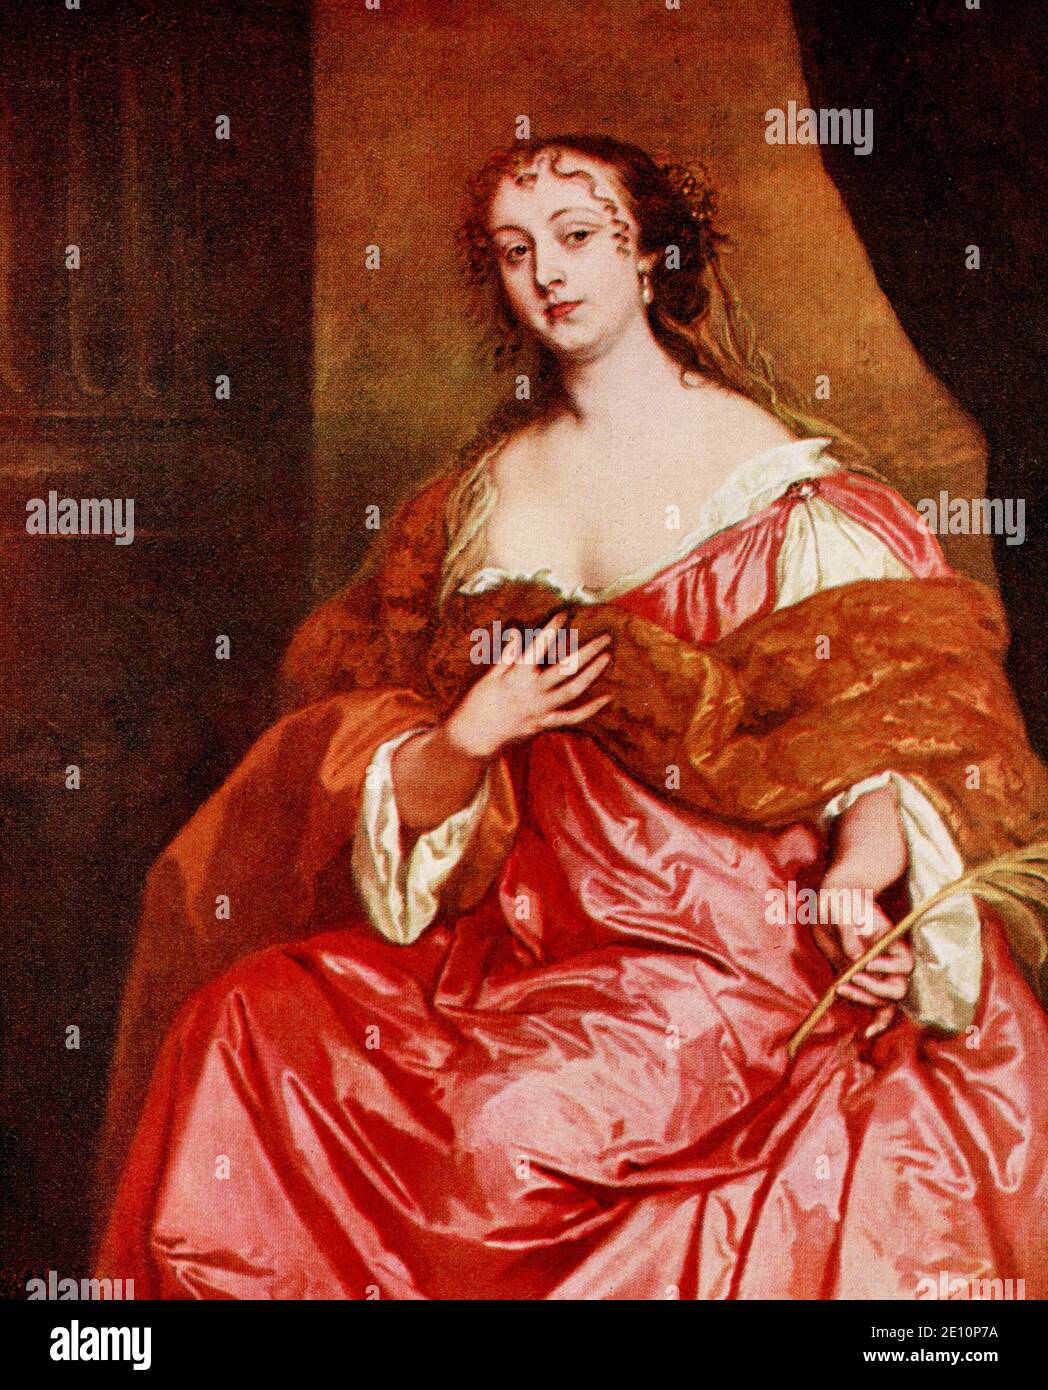 The Countess of Grammont from painting by Sir Peter Lely at Hampton Court Palace. Elizabeth, comtesse de Gramont (1641-1708), was an Irish-born beauty. She was a courtier, first after the Restoration at the court of Charles II of England in Whitehall and later, after her marriage to Philibert de Gramont, at the court of Louis XIV where she was a lady-in-waiting to the French queen, Maria Theresa of Spain. Sir Peter Lely (1618-1680) was a painter of Dutch origin whose career was nearly all spent in England, where he became the dominant portrait painter to the court. Stock Photo